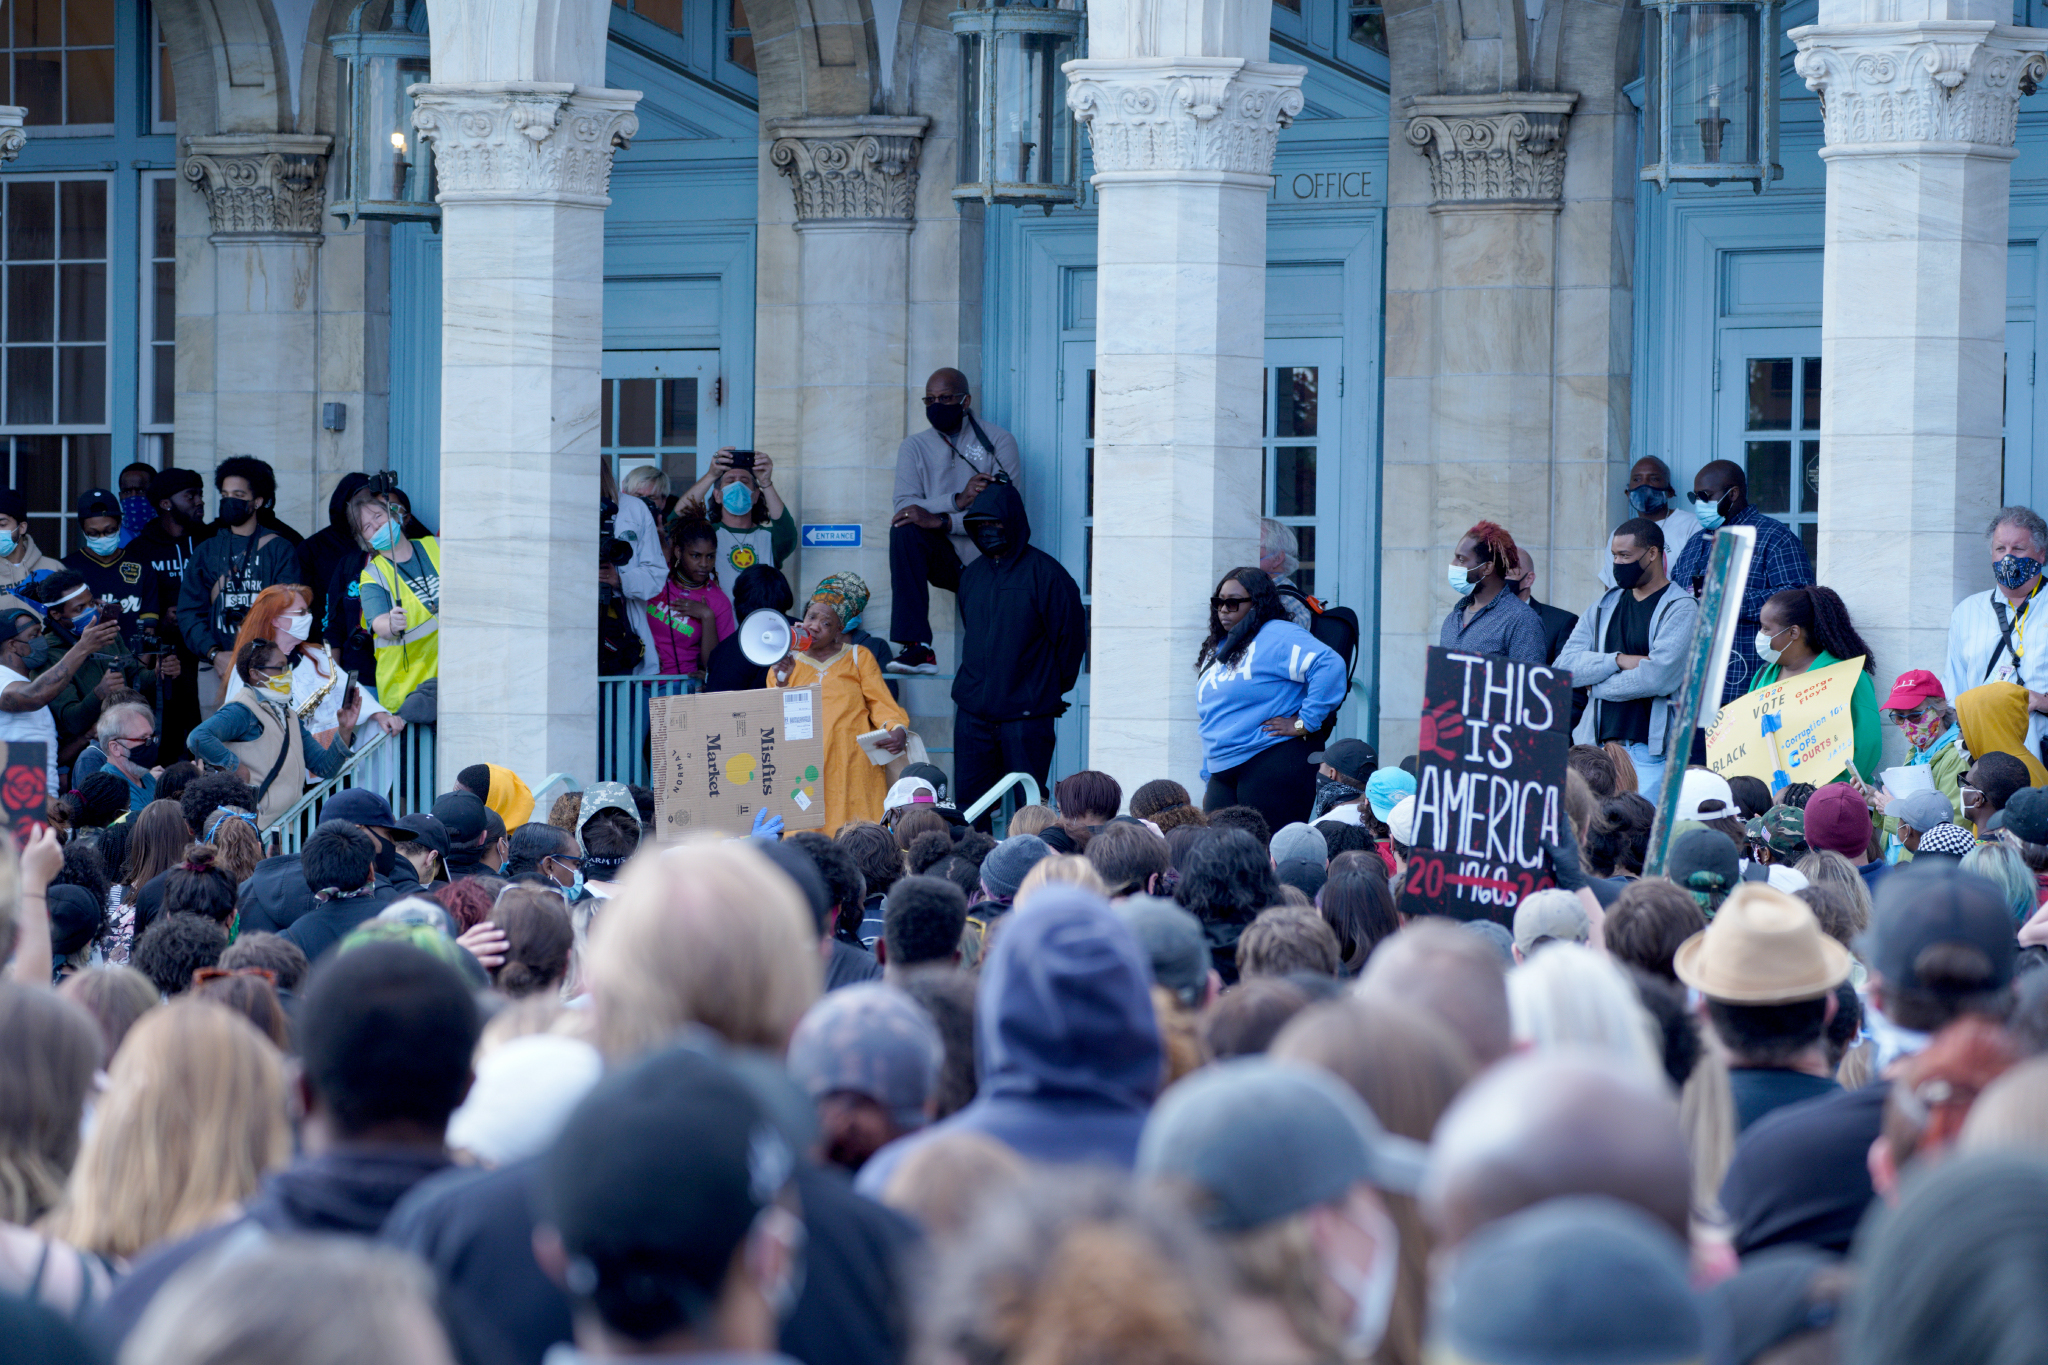 PHOTO: Crowd listening to a speaker on the steps of the Asbury Park post office.